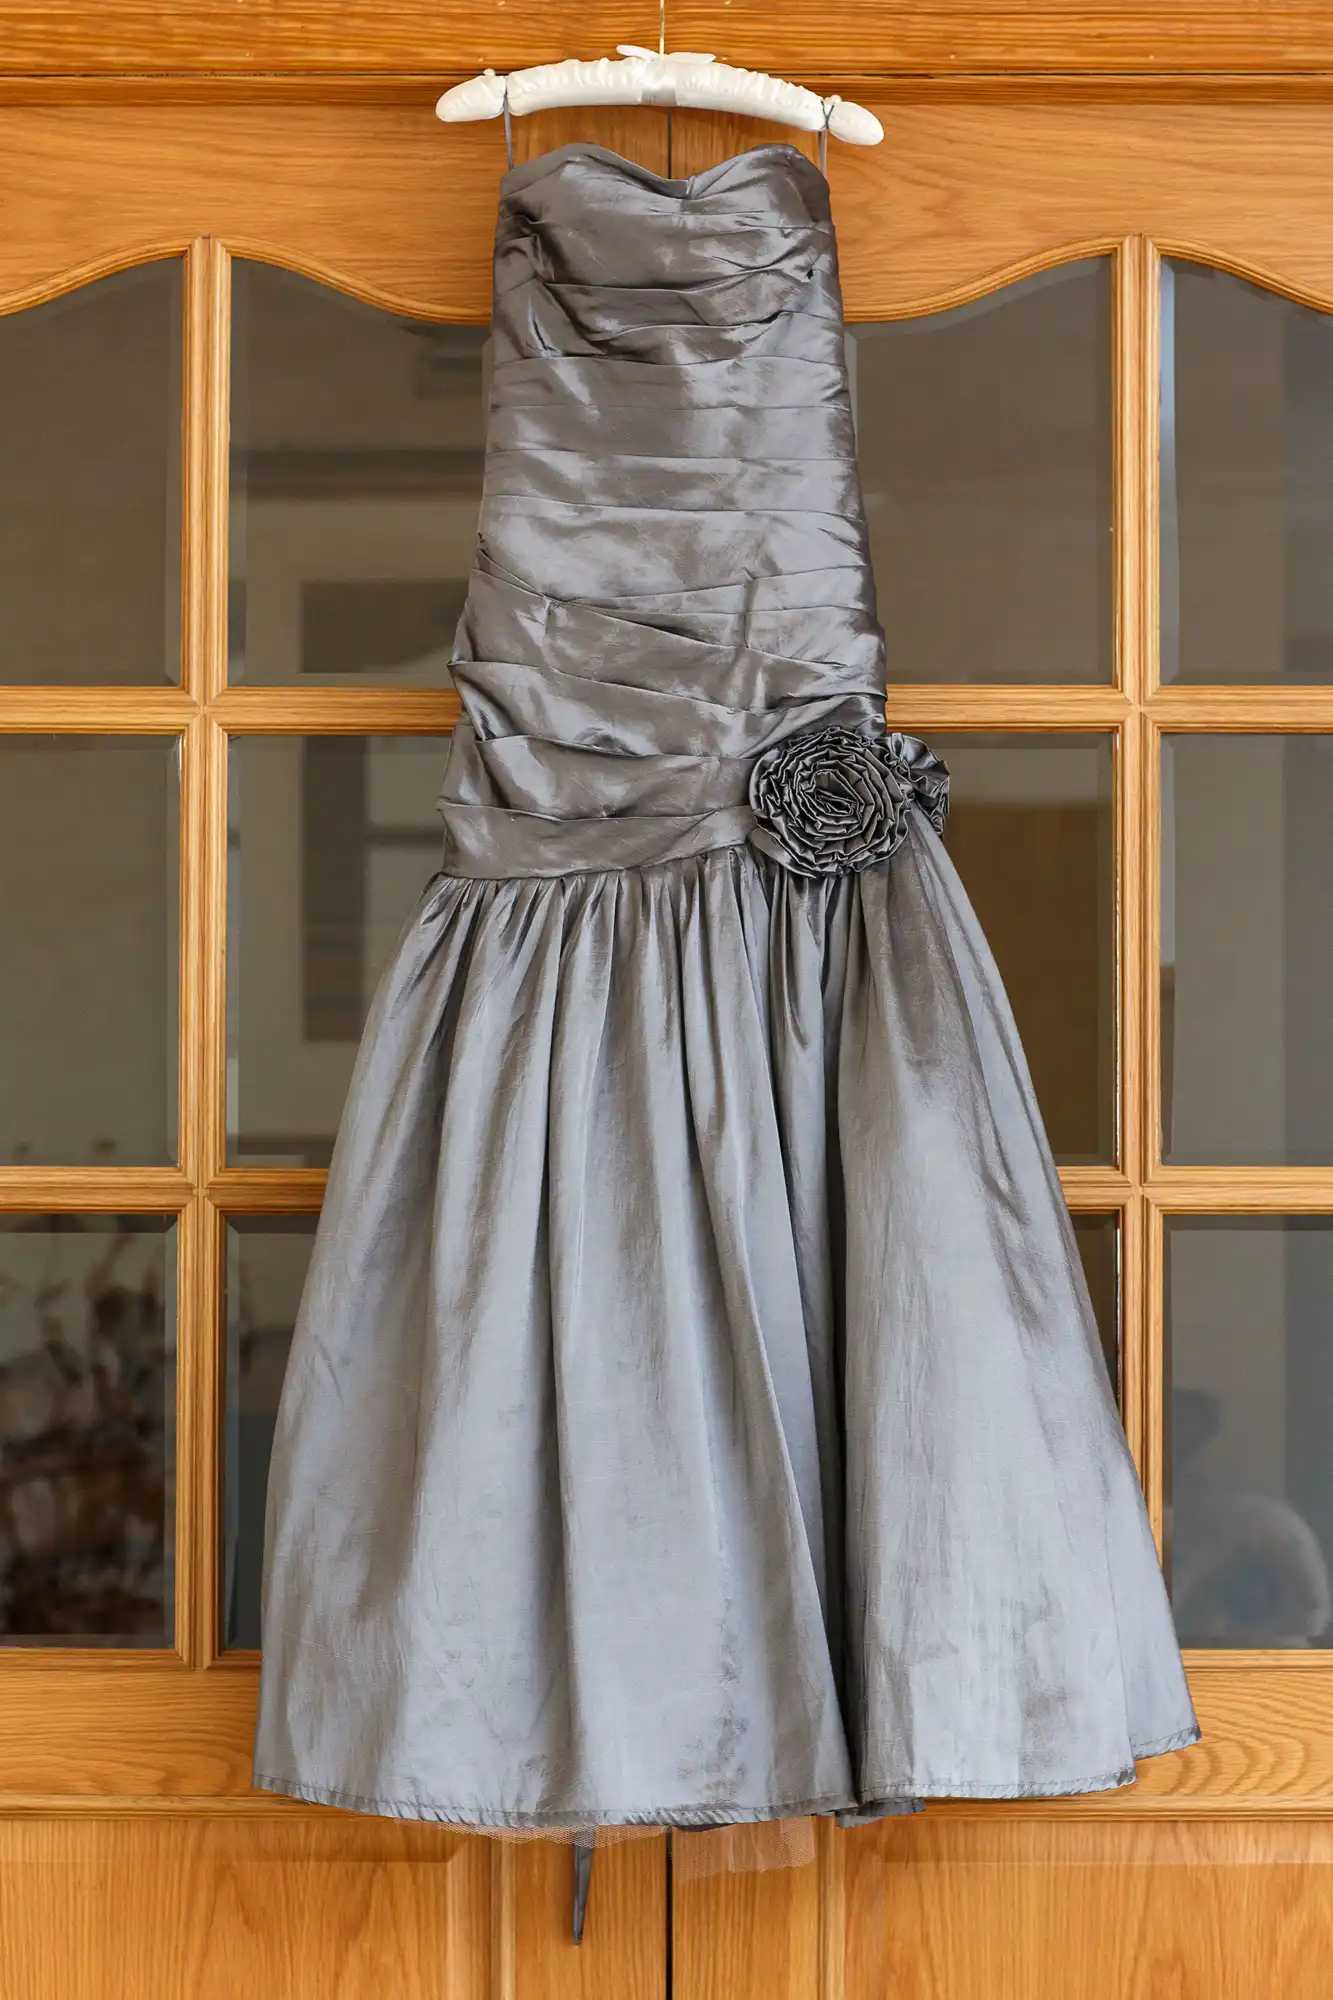 Gray cocktail dress with a rose detail, hanging on a wooden door with glass panels.